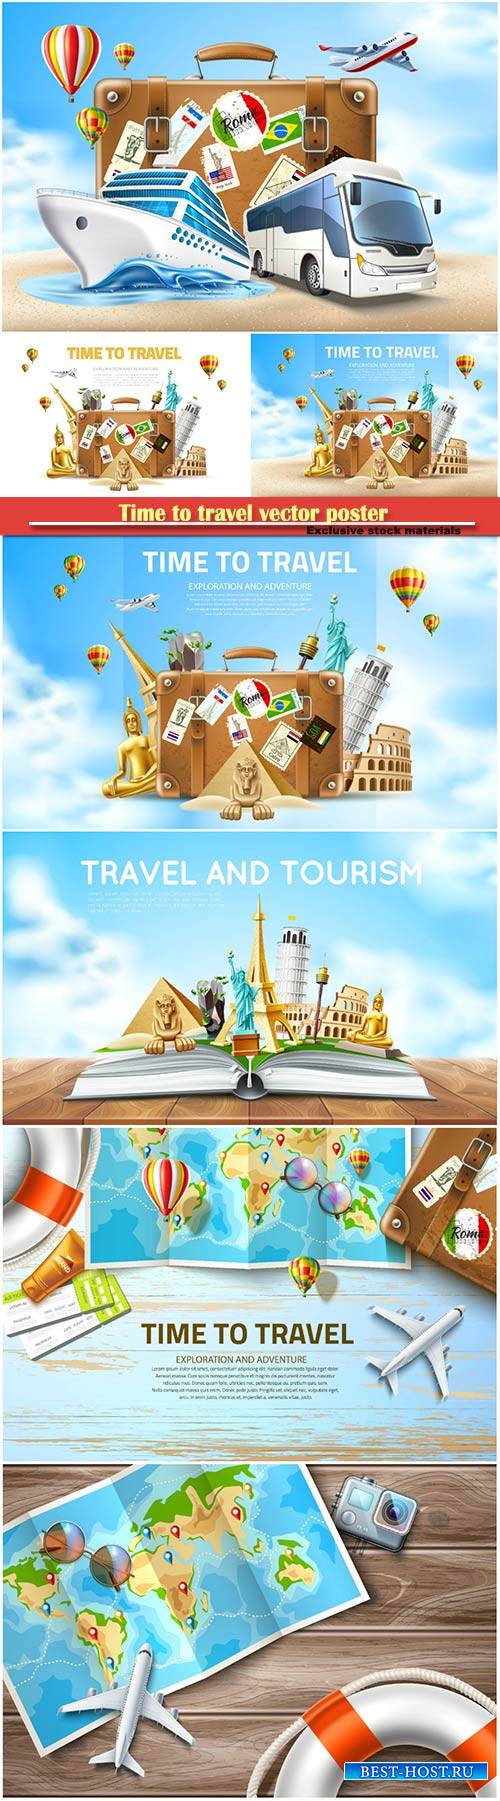 Time to travel vector poster, travelling and tourism banner